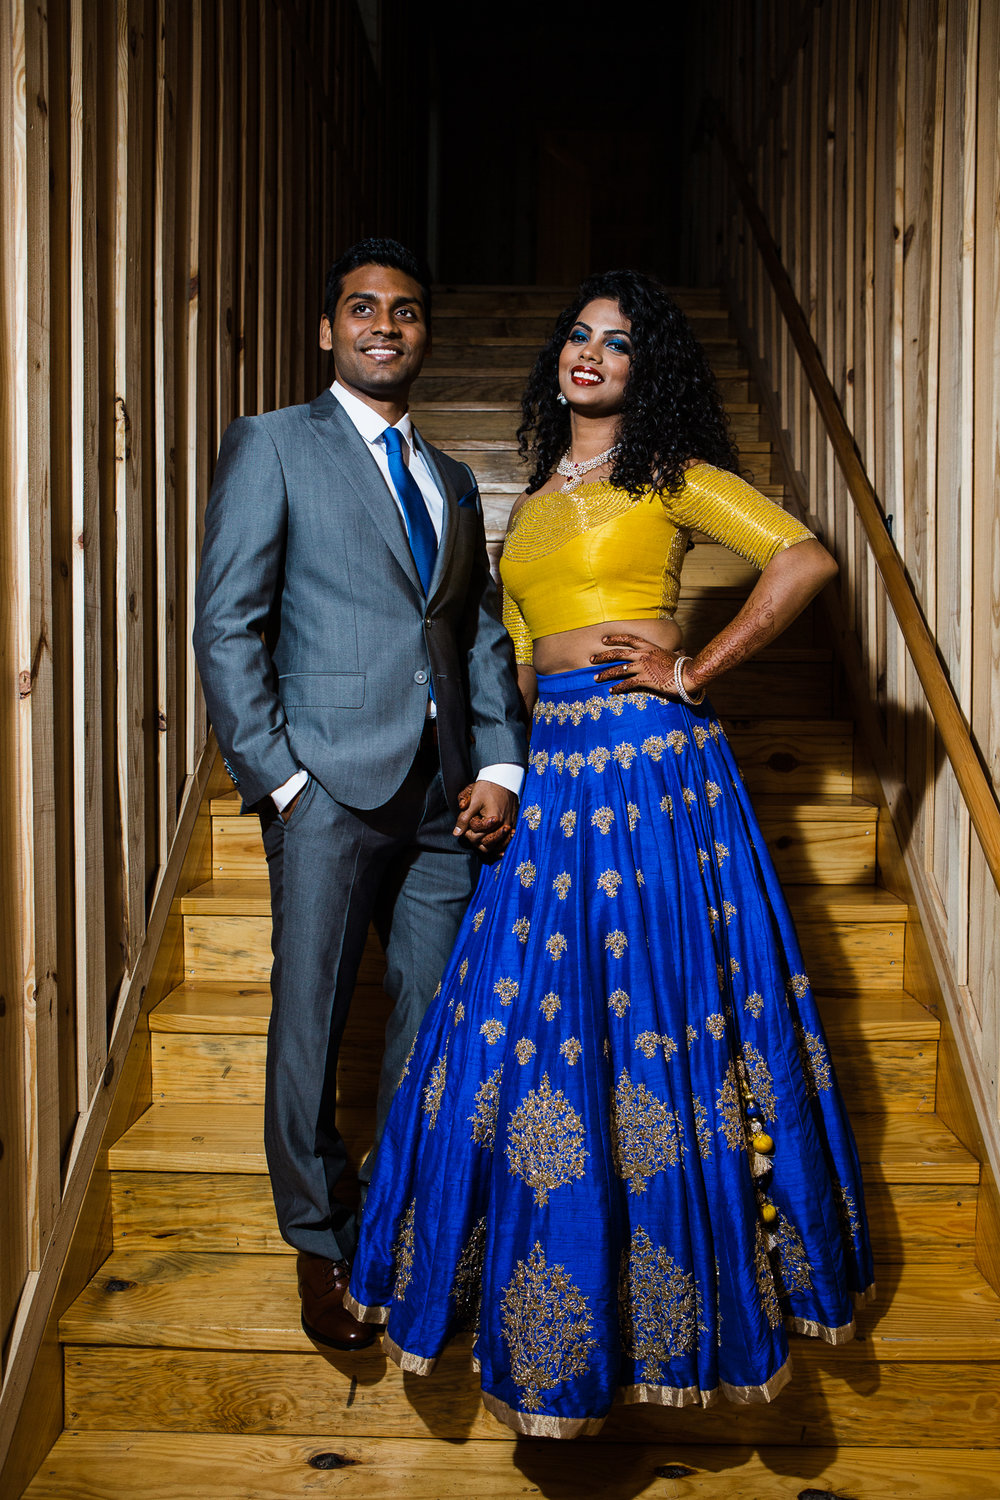 Keerthi and Kishore - Indian Wedding - elizalde photography - Dallas Photographer - South Asian Wedding Photographer - The SPRINGS Event Venue (181 of 226).jpg